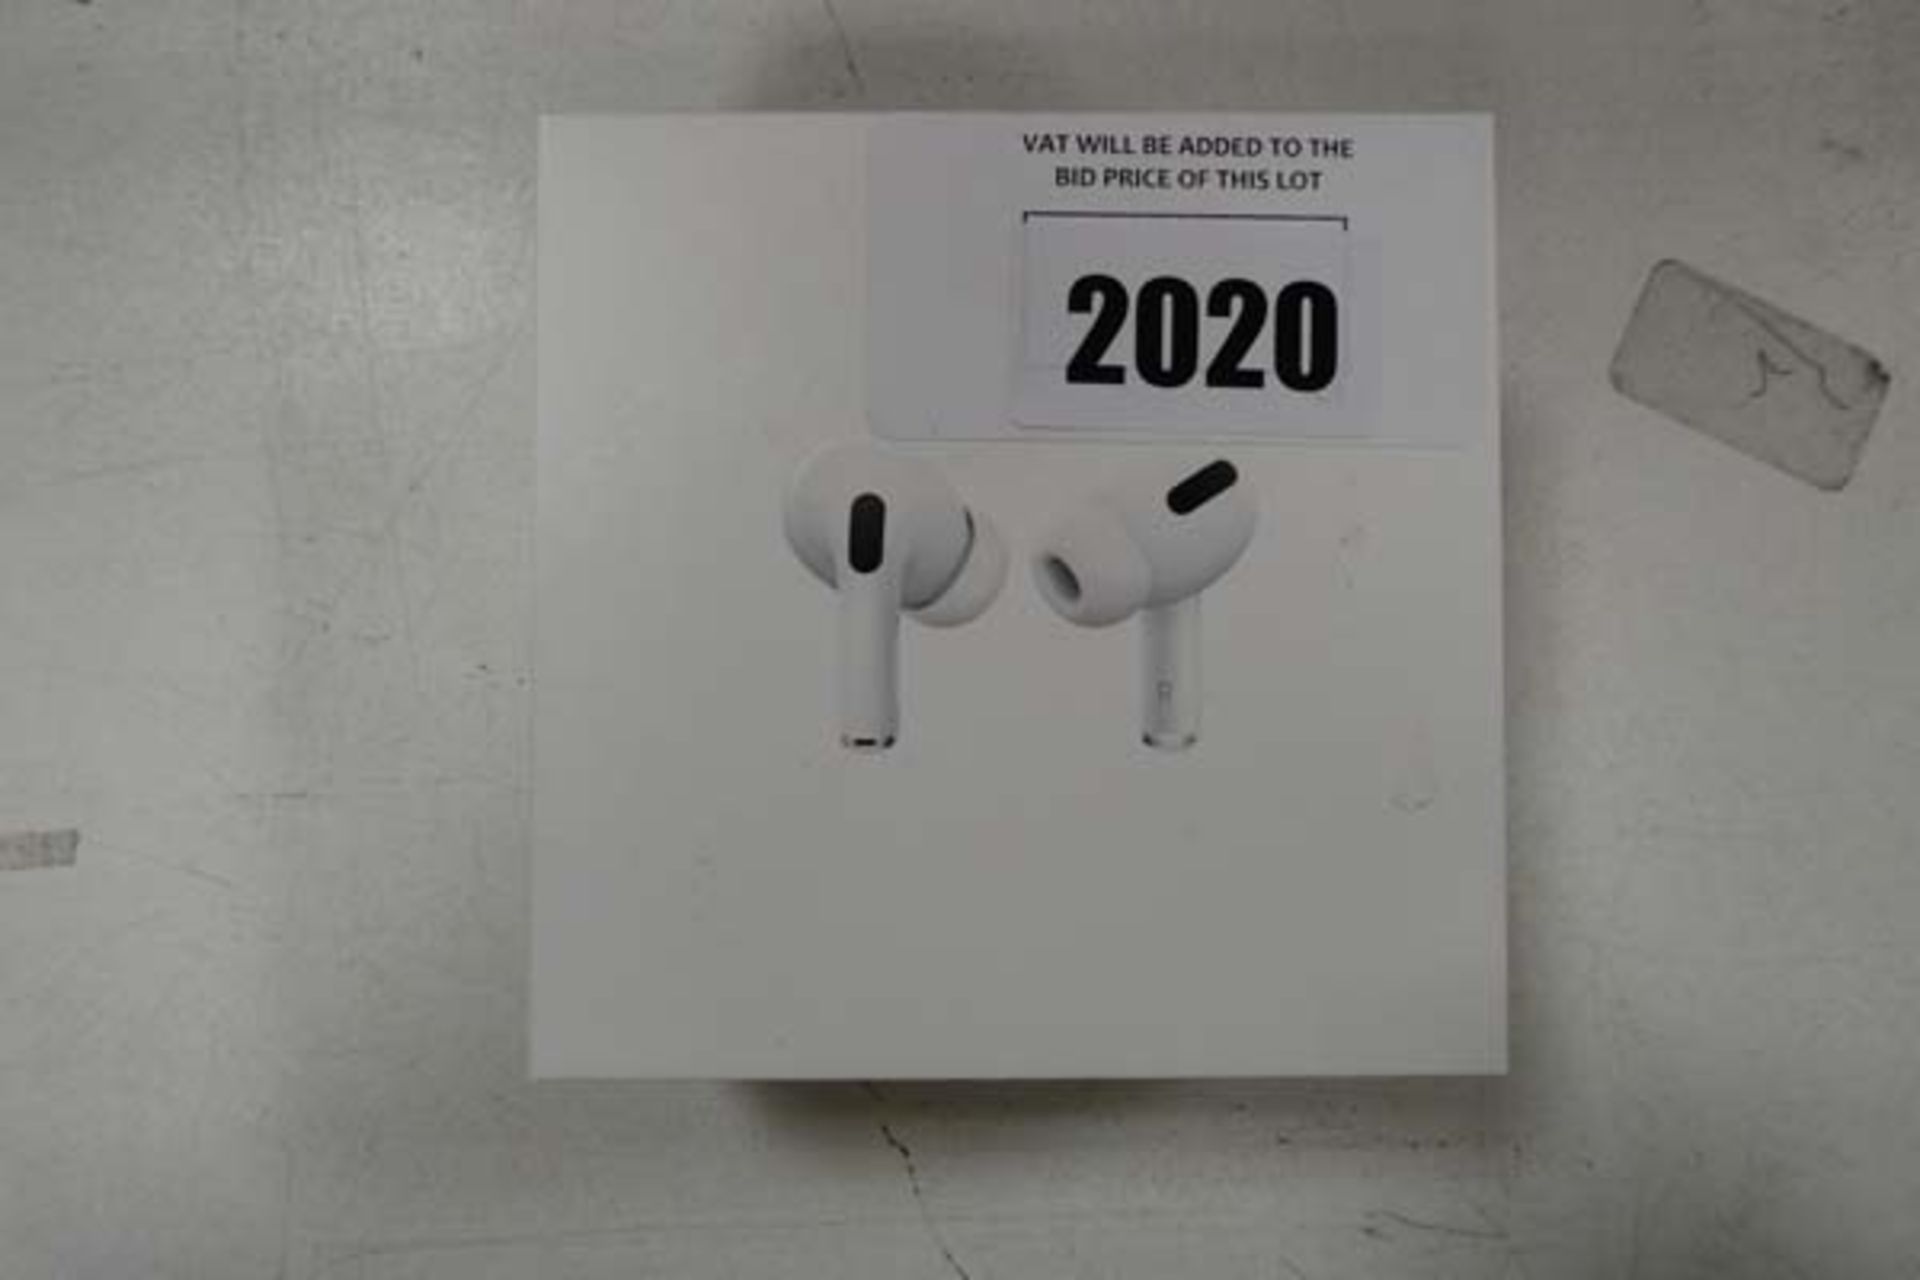 Pair of Apple AirPods Pro with wireless charging case and box - Image 2 of 2